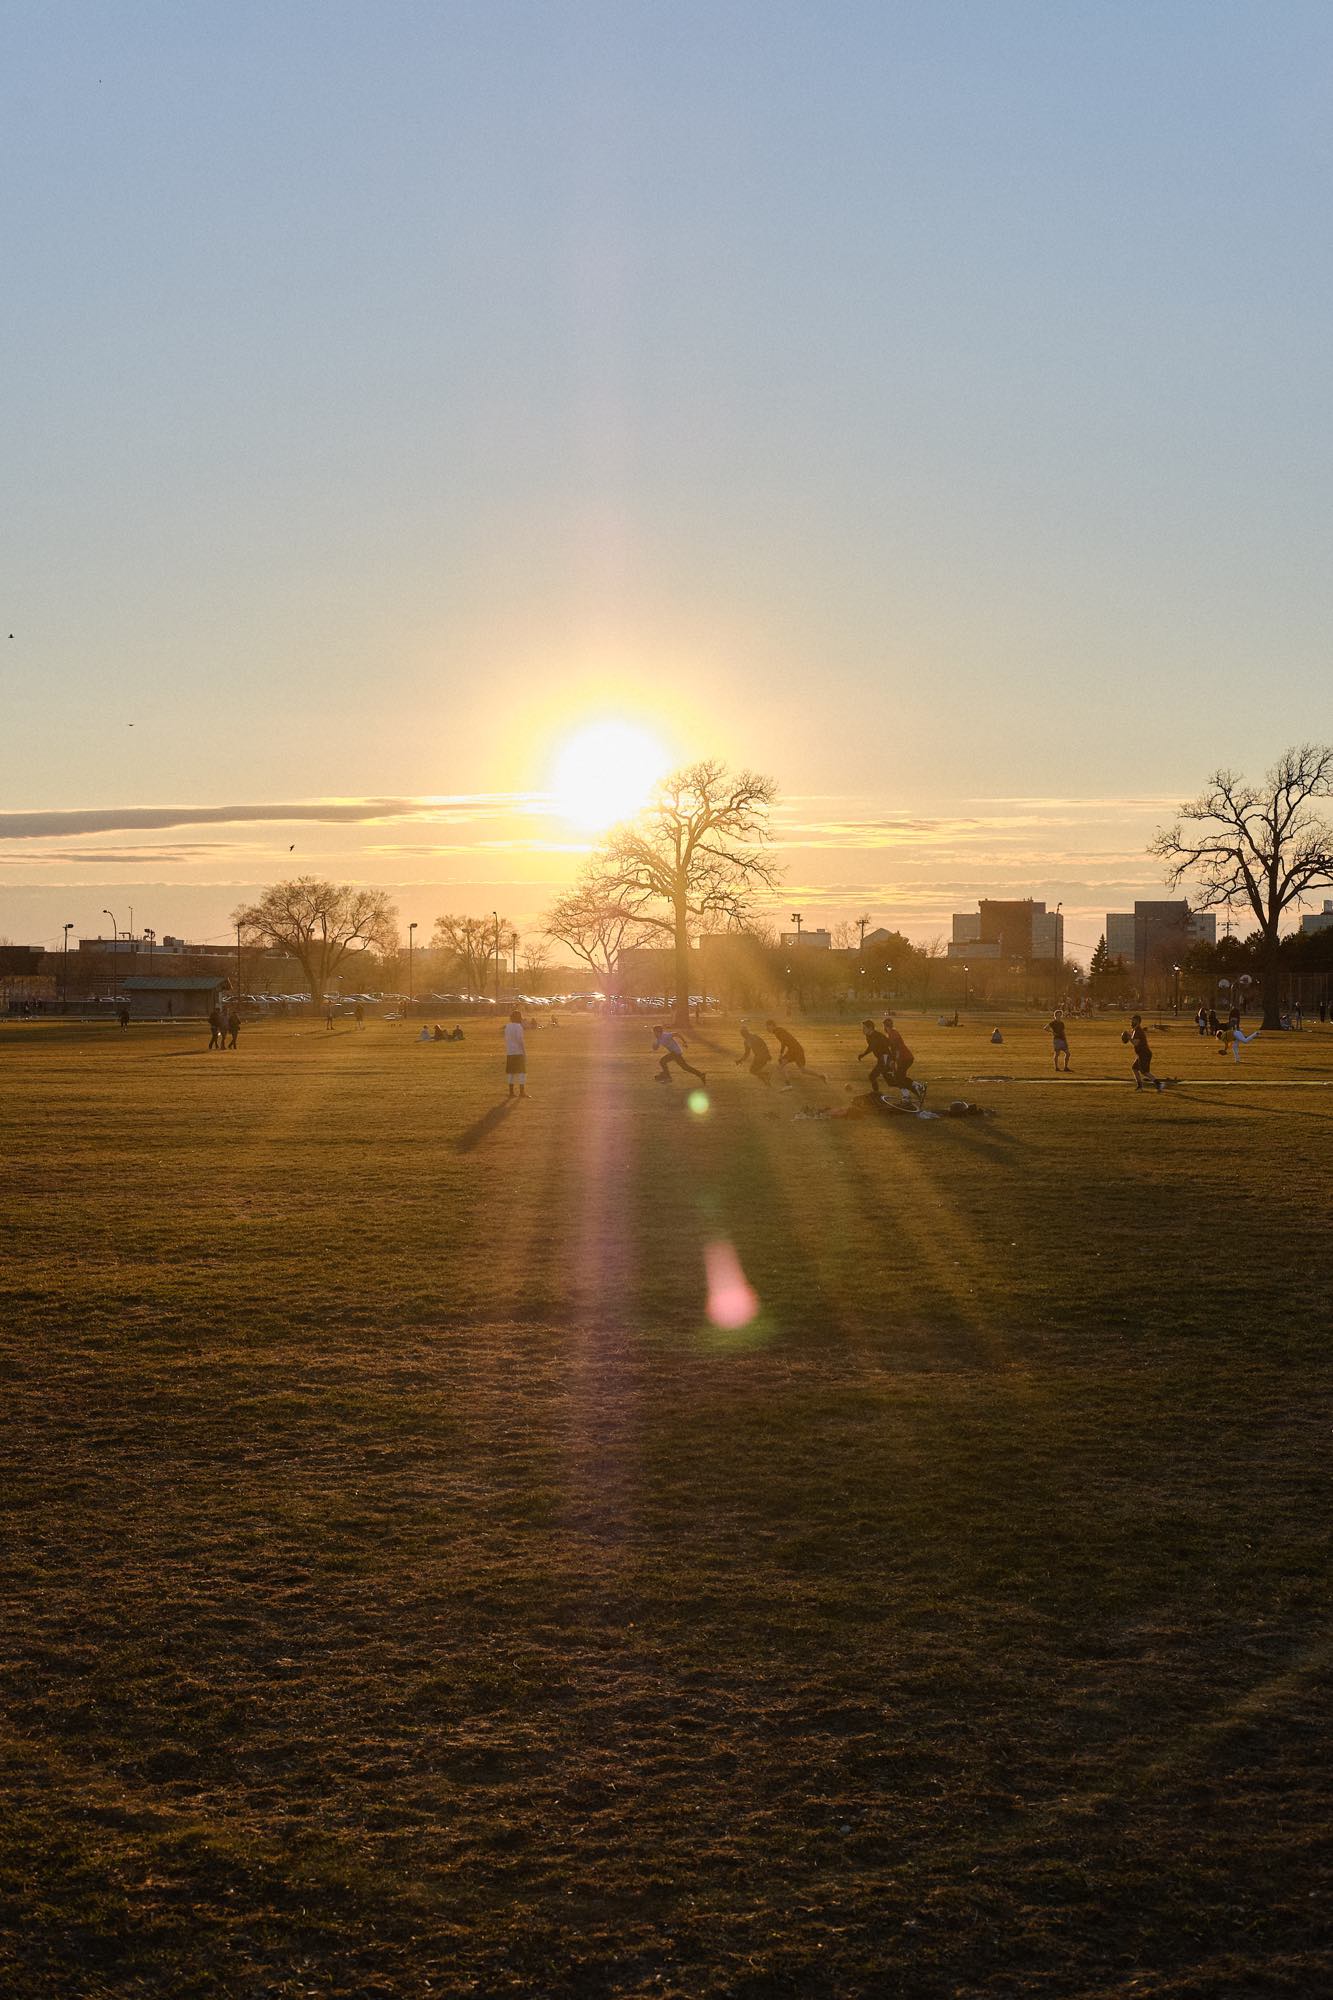 A group of men are playing a team sport—maybe rugby—as the sun sets behind them